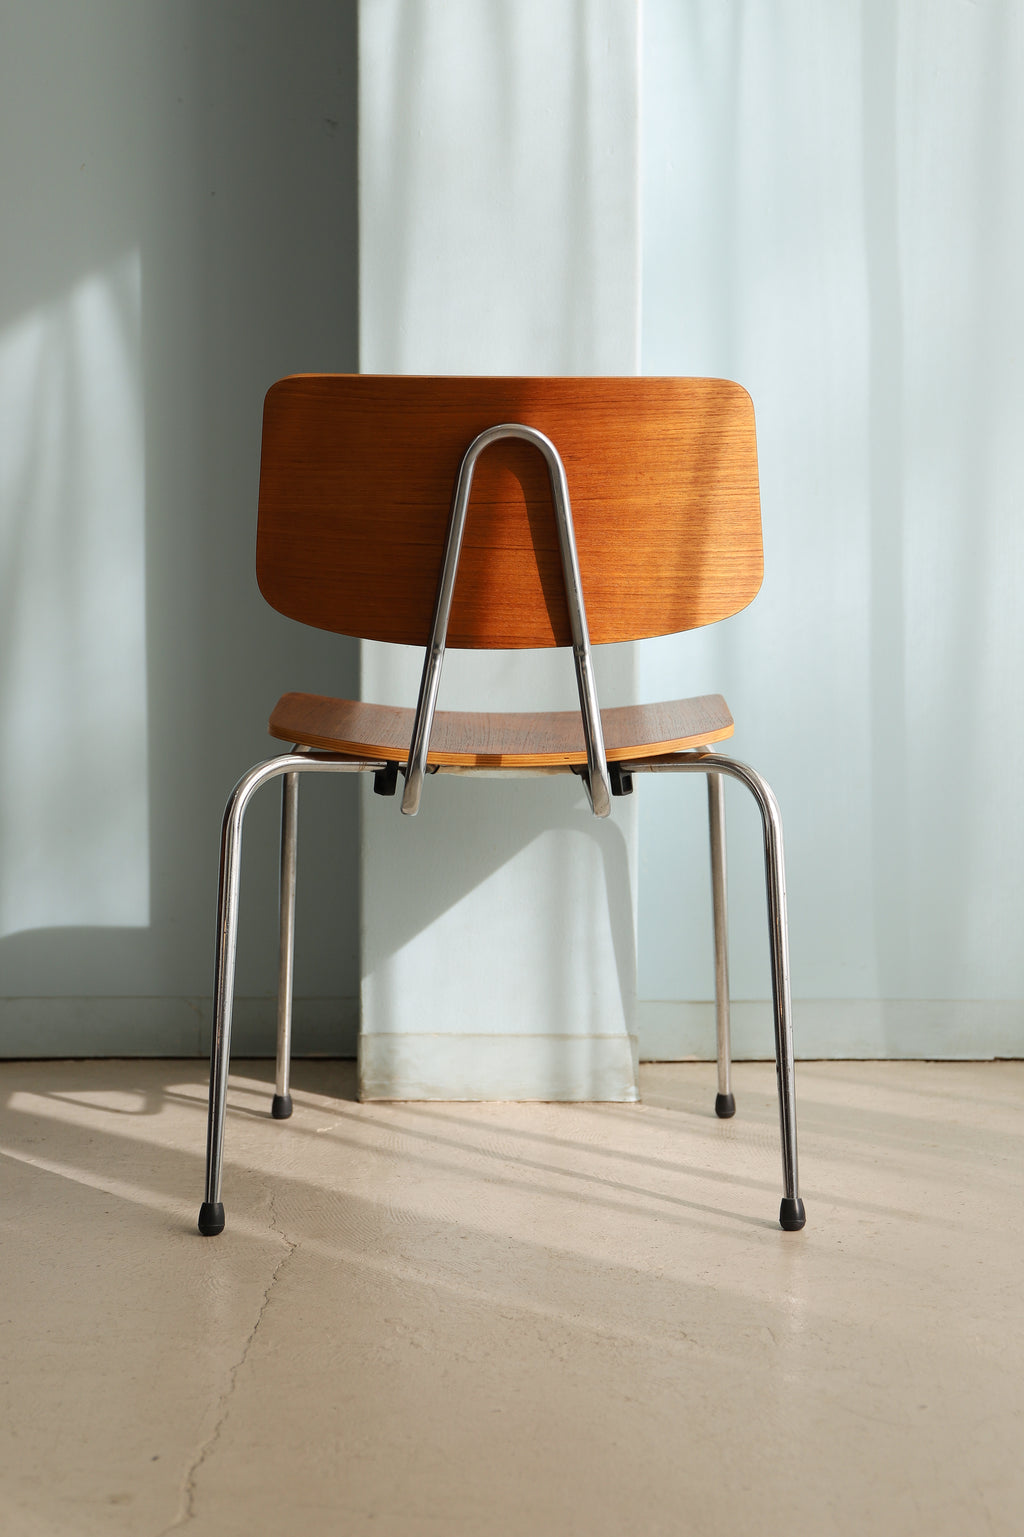 Danish Vintage Duba Møbelindustri Plywood Stacking Chair/デンマークヴィンテージ  スタッキングチェア 椅子 プライウッド チーク 北欧家具